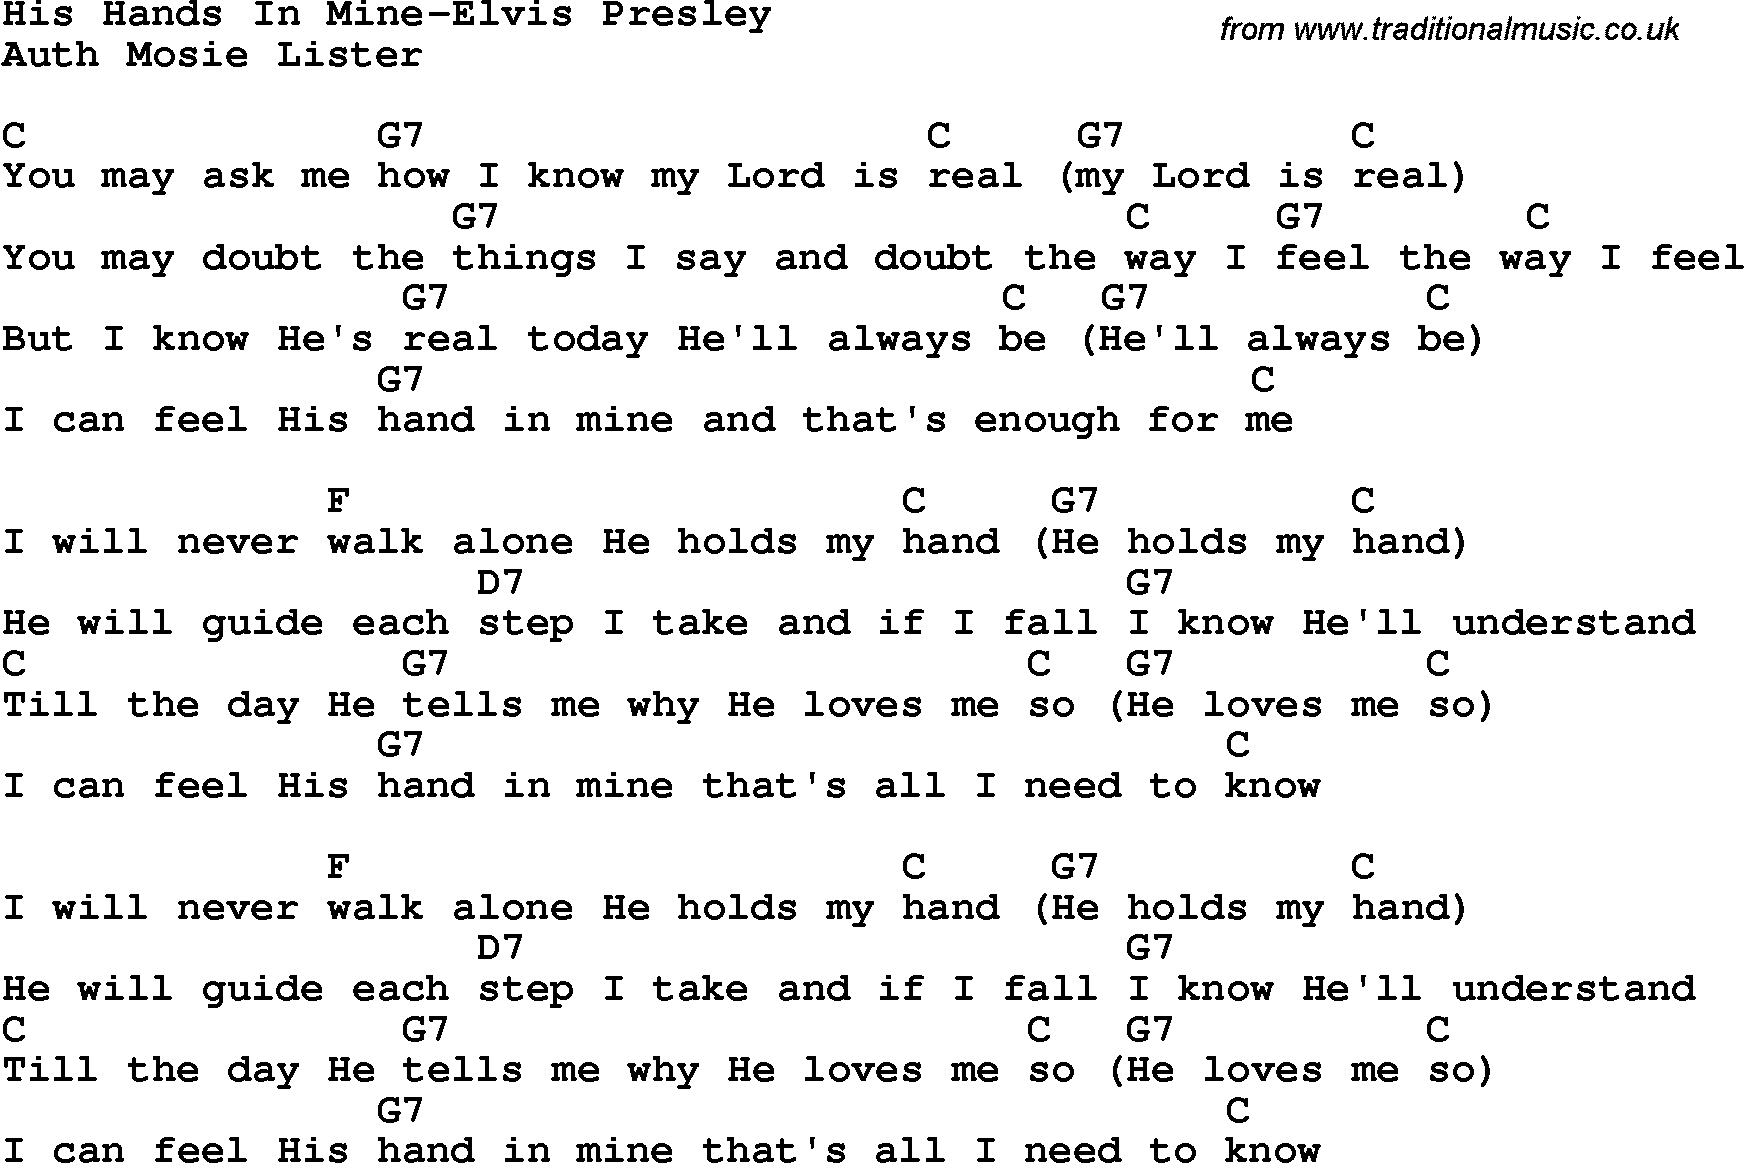 Country, Southern and Bluegrass Gospel Song His Hands In Mine-Elvis Presley lyrics and chords